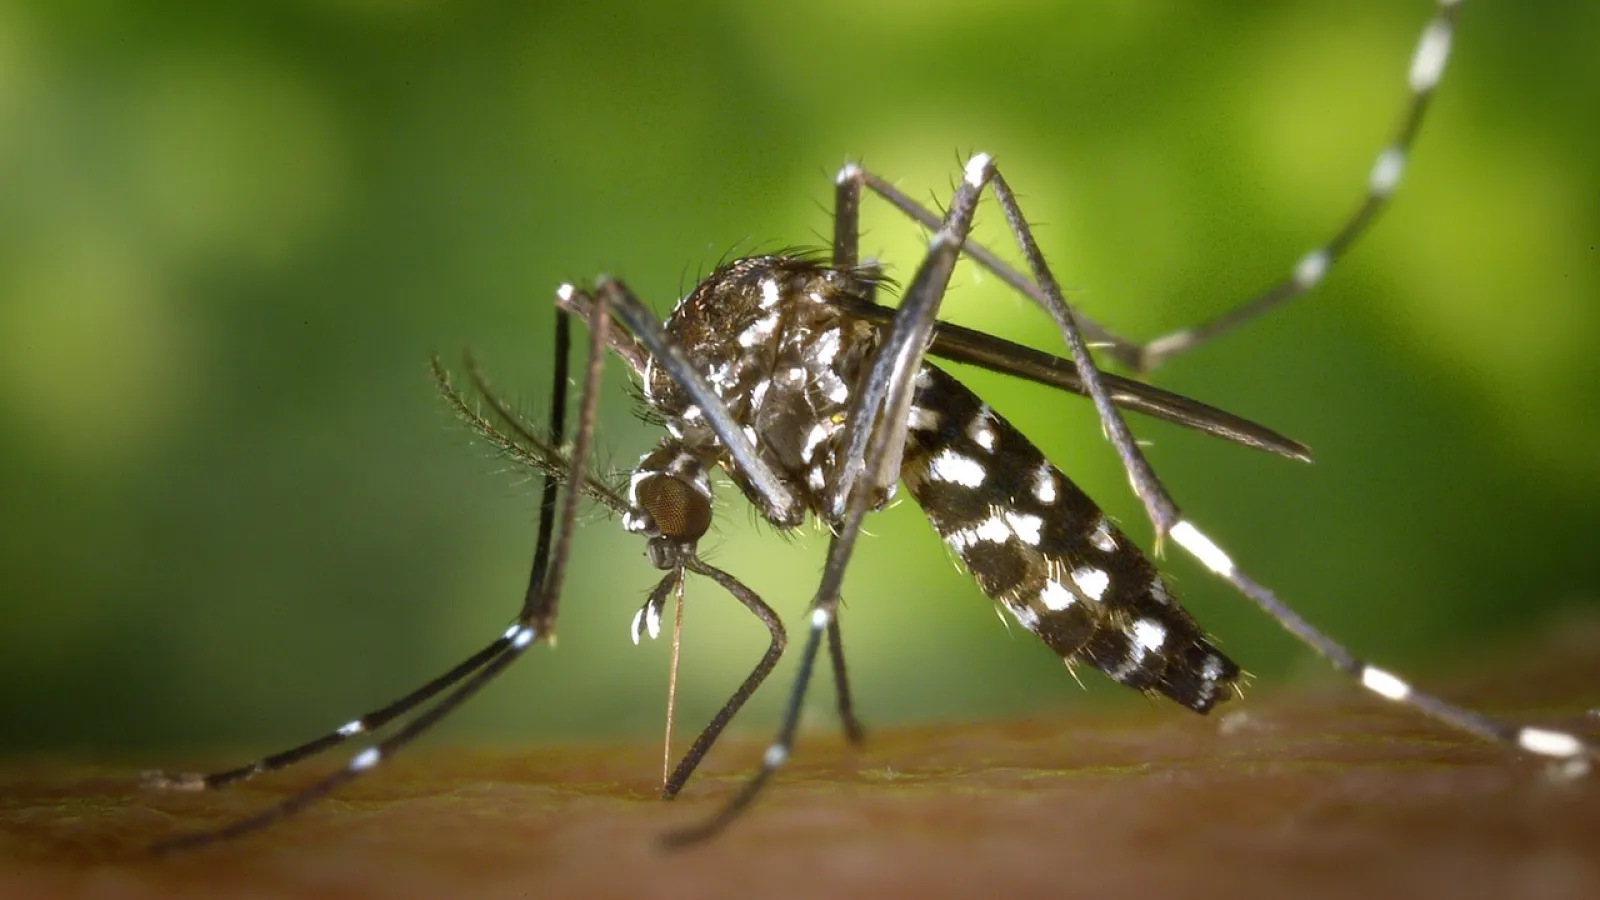 a close up of a mosquito